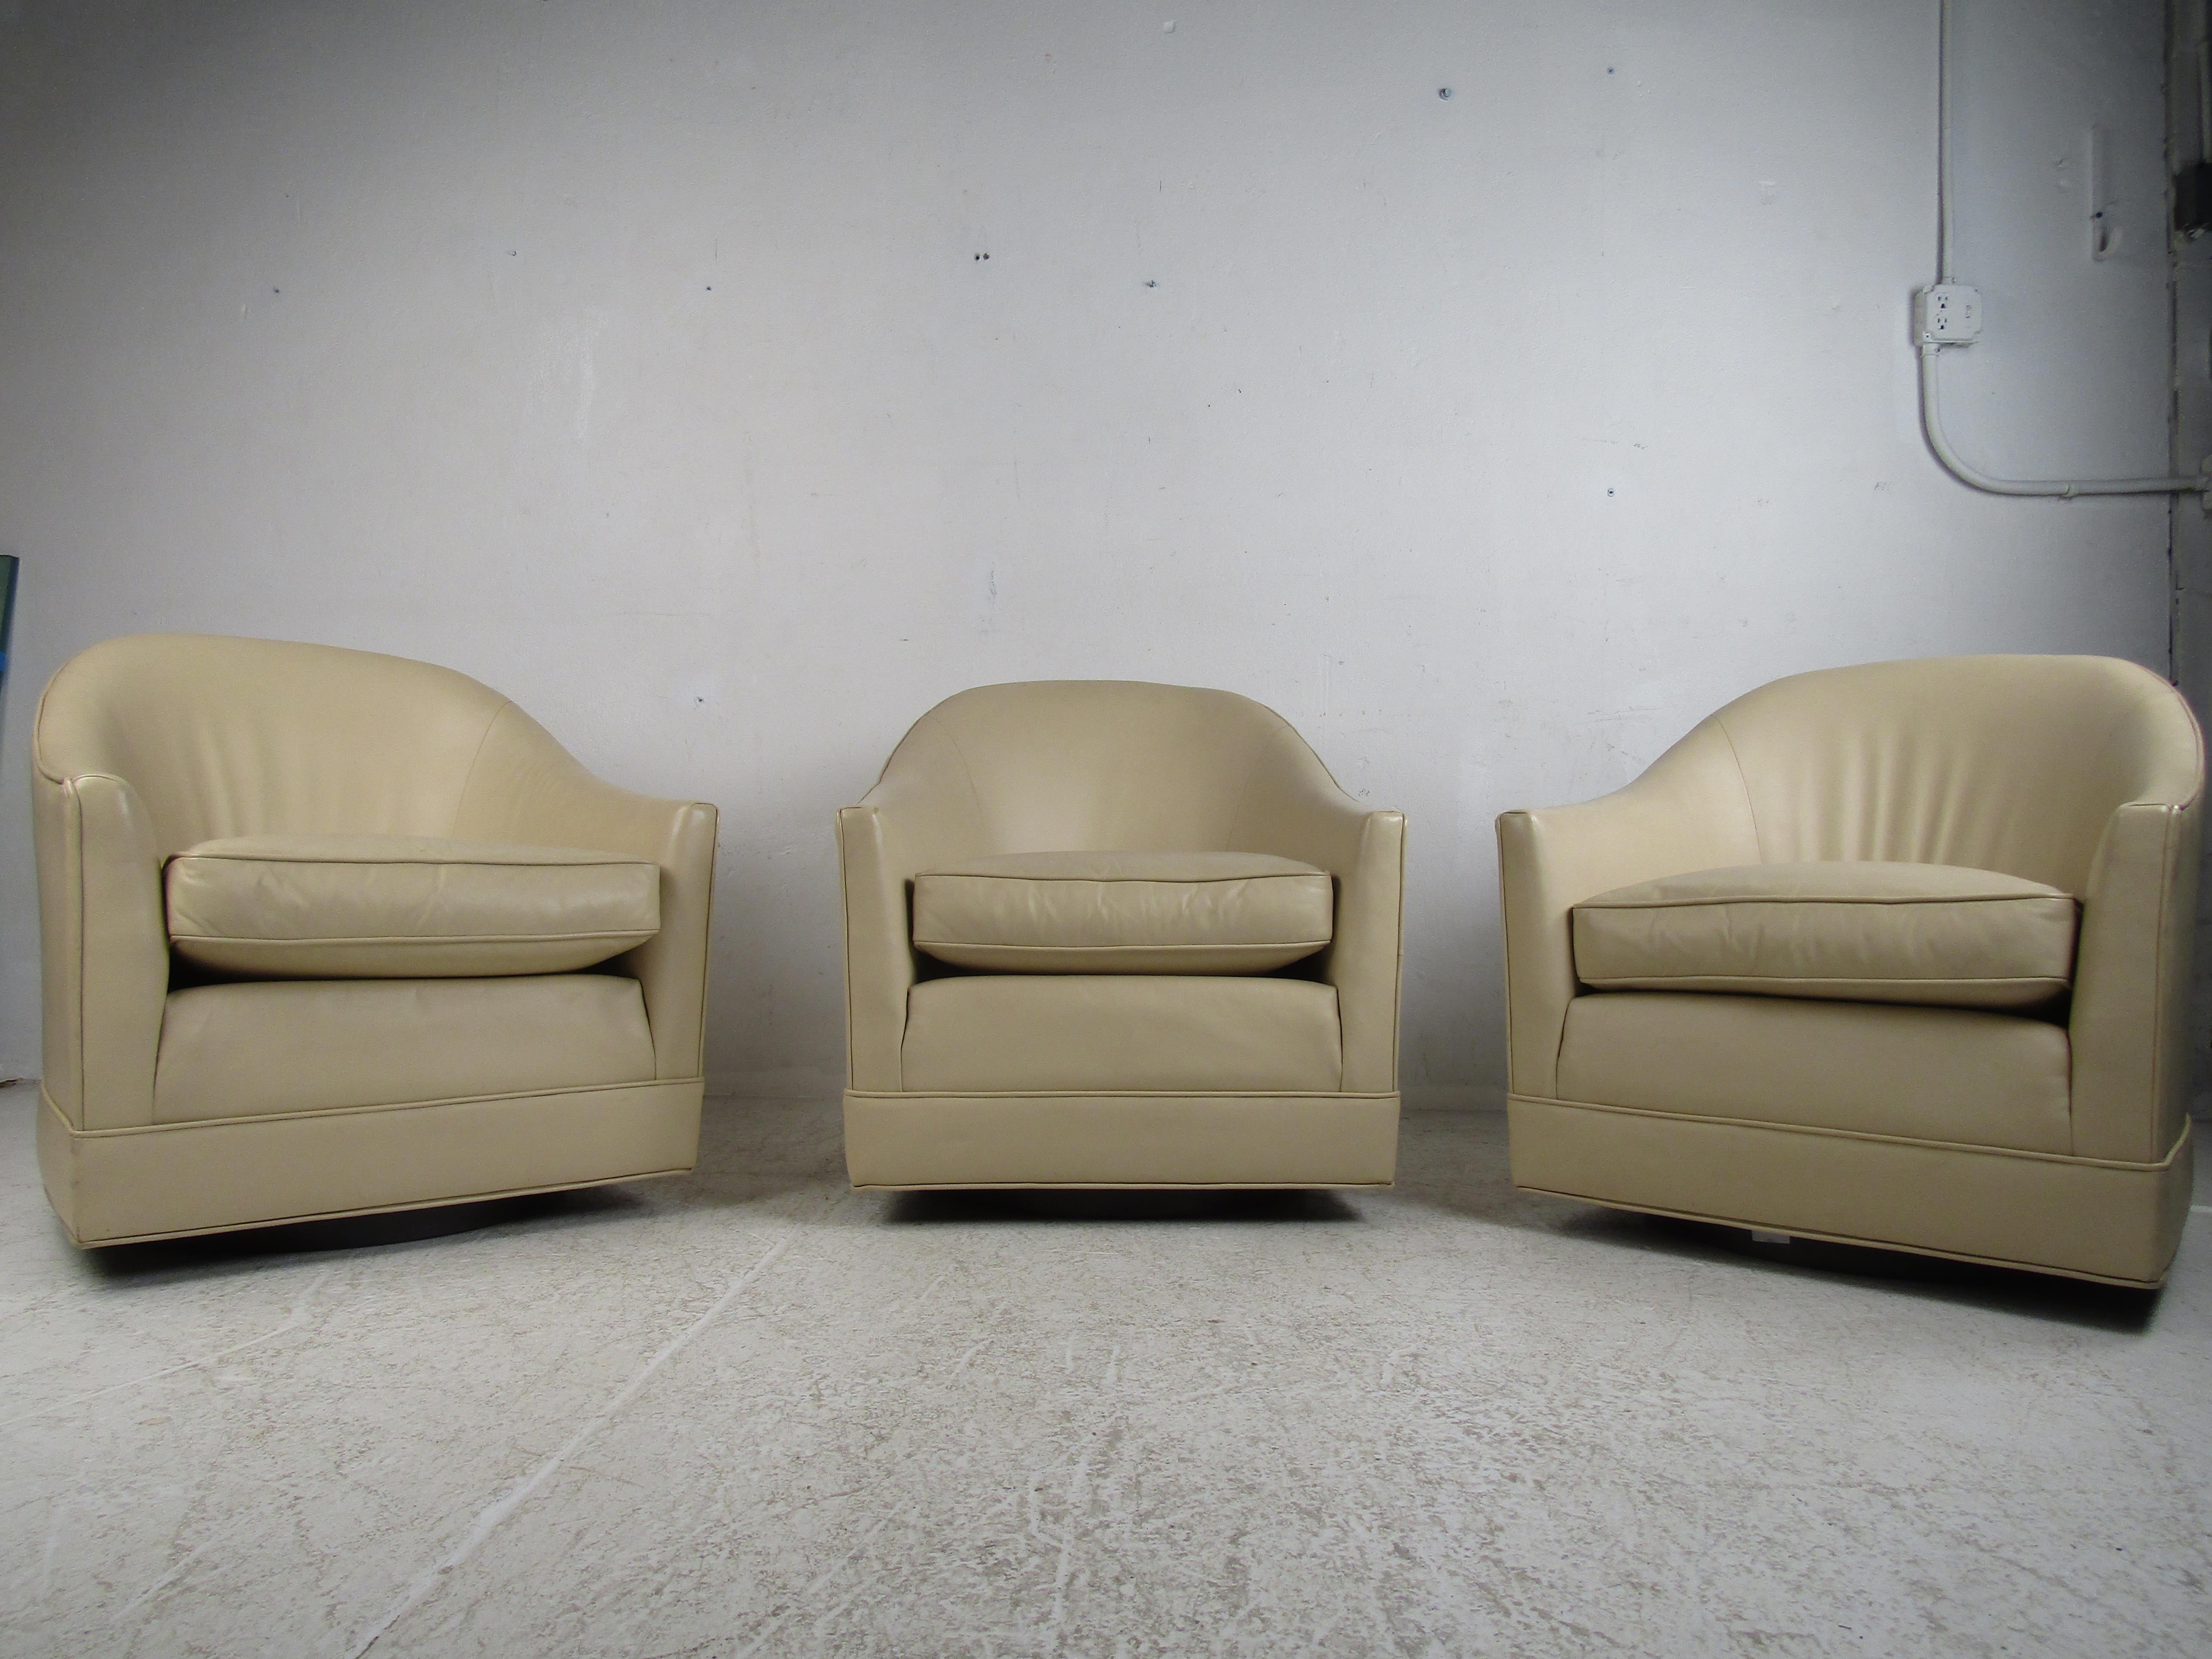 A set of Mid-Century Modern lounge chairs in the style of Harvey Probber. Perfect for any home/office setting. 

Confirm pickup location with seller (NY/NJ).